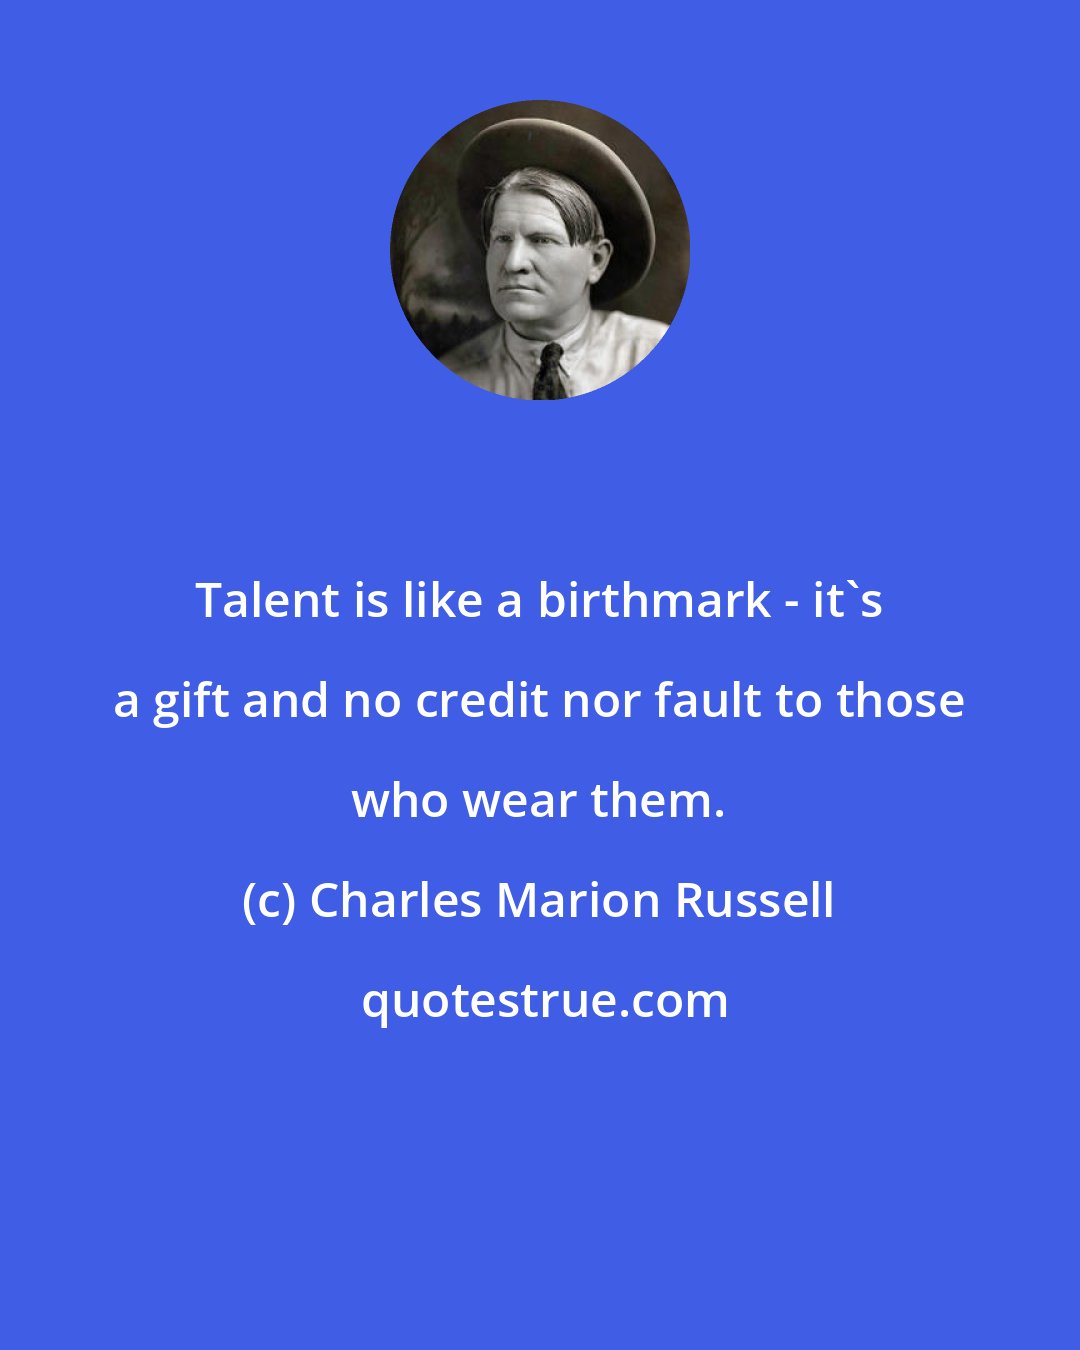 Charles Marion Russell: Talent is like a birthmark - it's a gift and no credit nor fault to those who wear them.